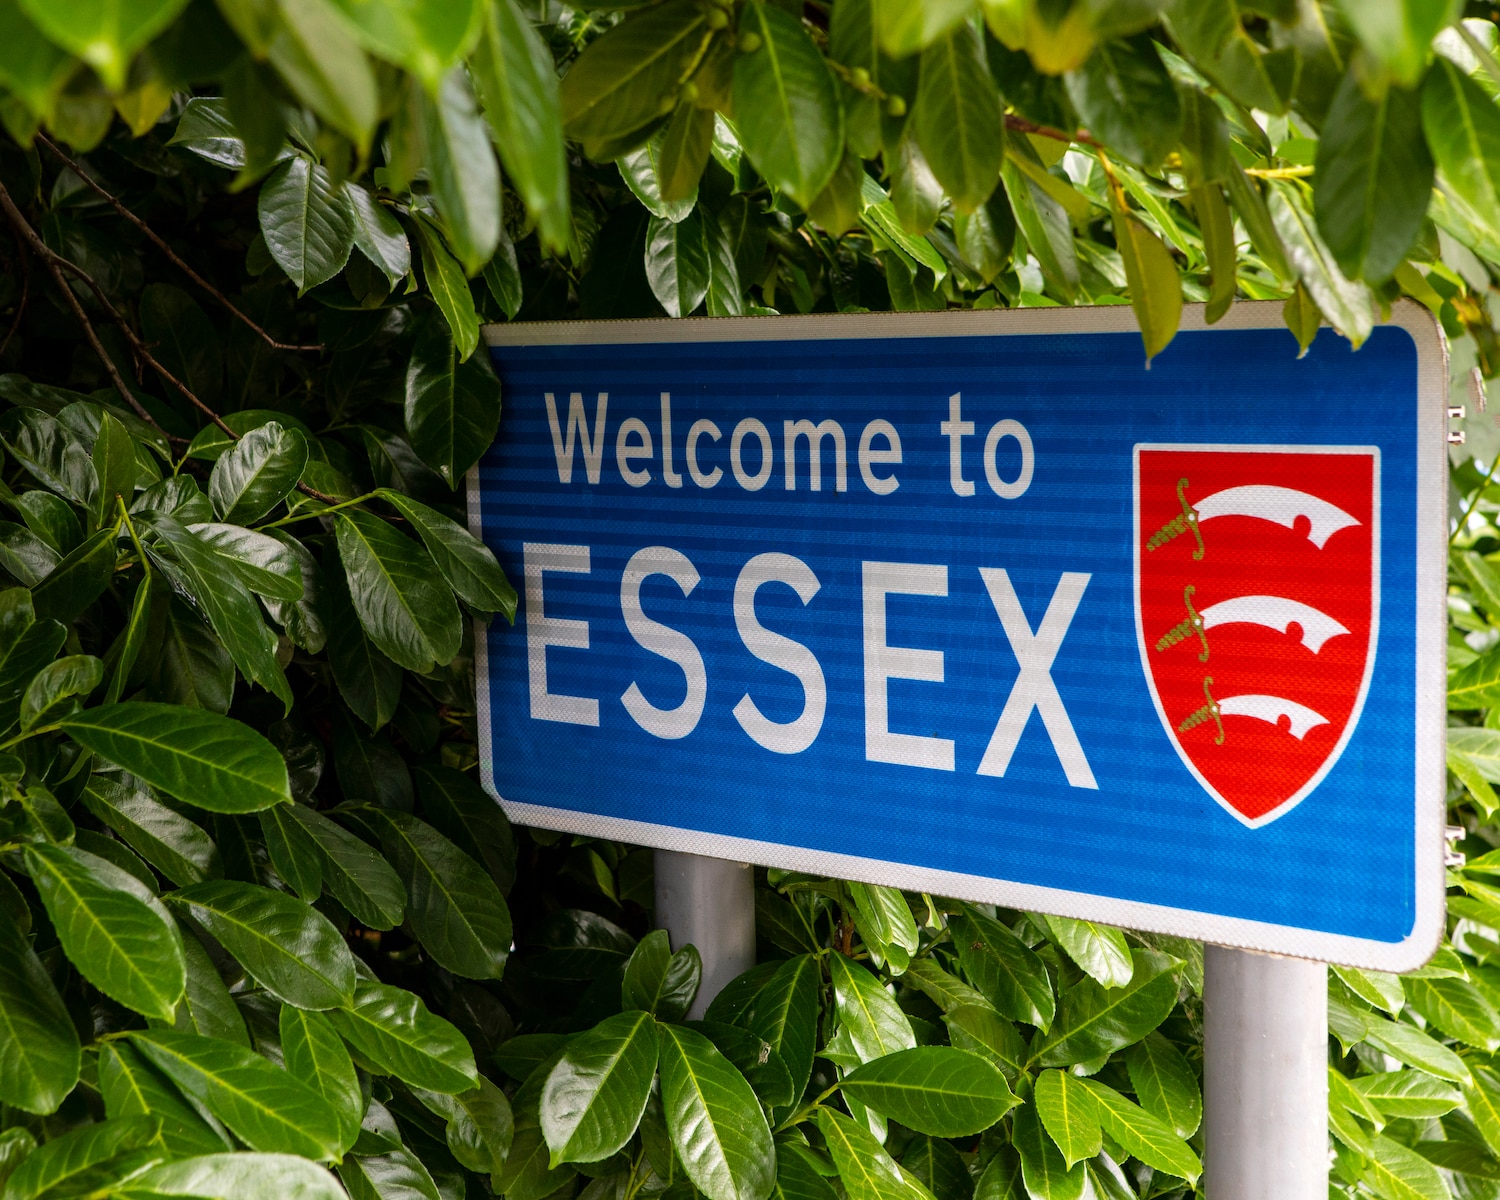 Is Brentwood a nice place? 5 Reasons to move. Image shows a blue 'Welcome to Essex' sign nestled in some green leaves.